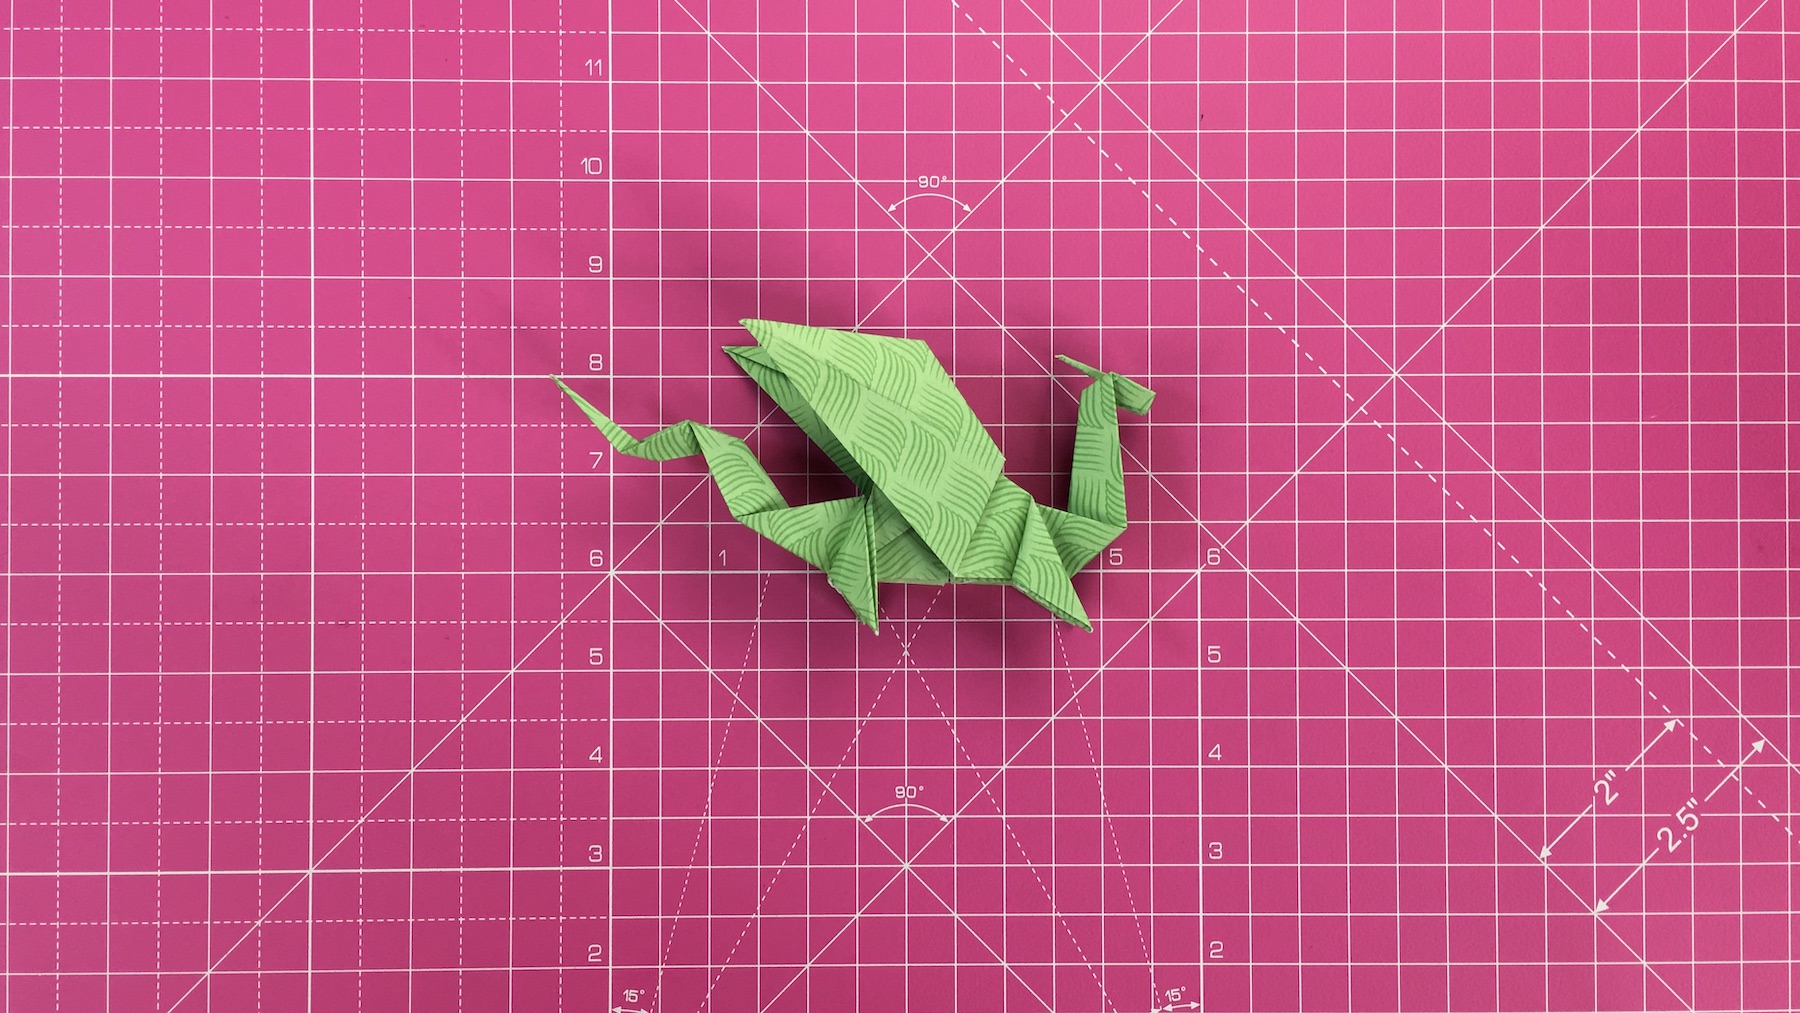 How to make an origami dragon, origami dragon tutorial - step 56